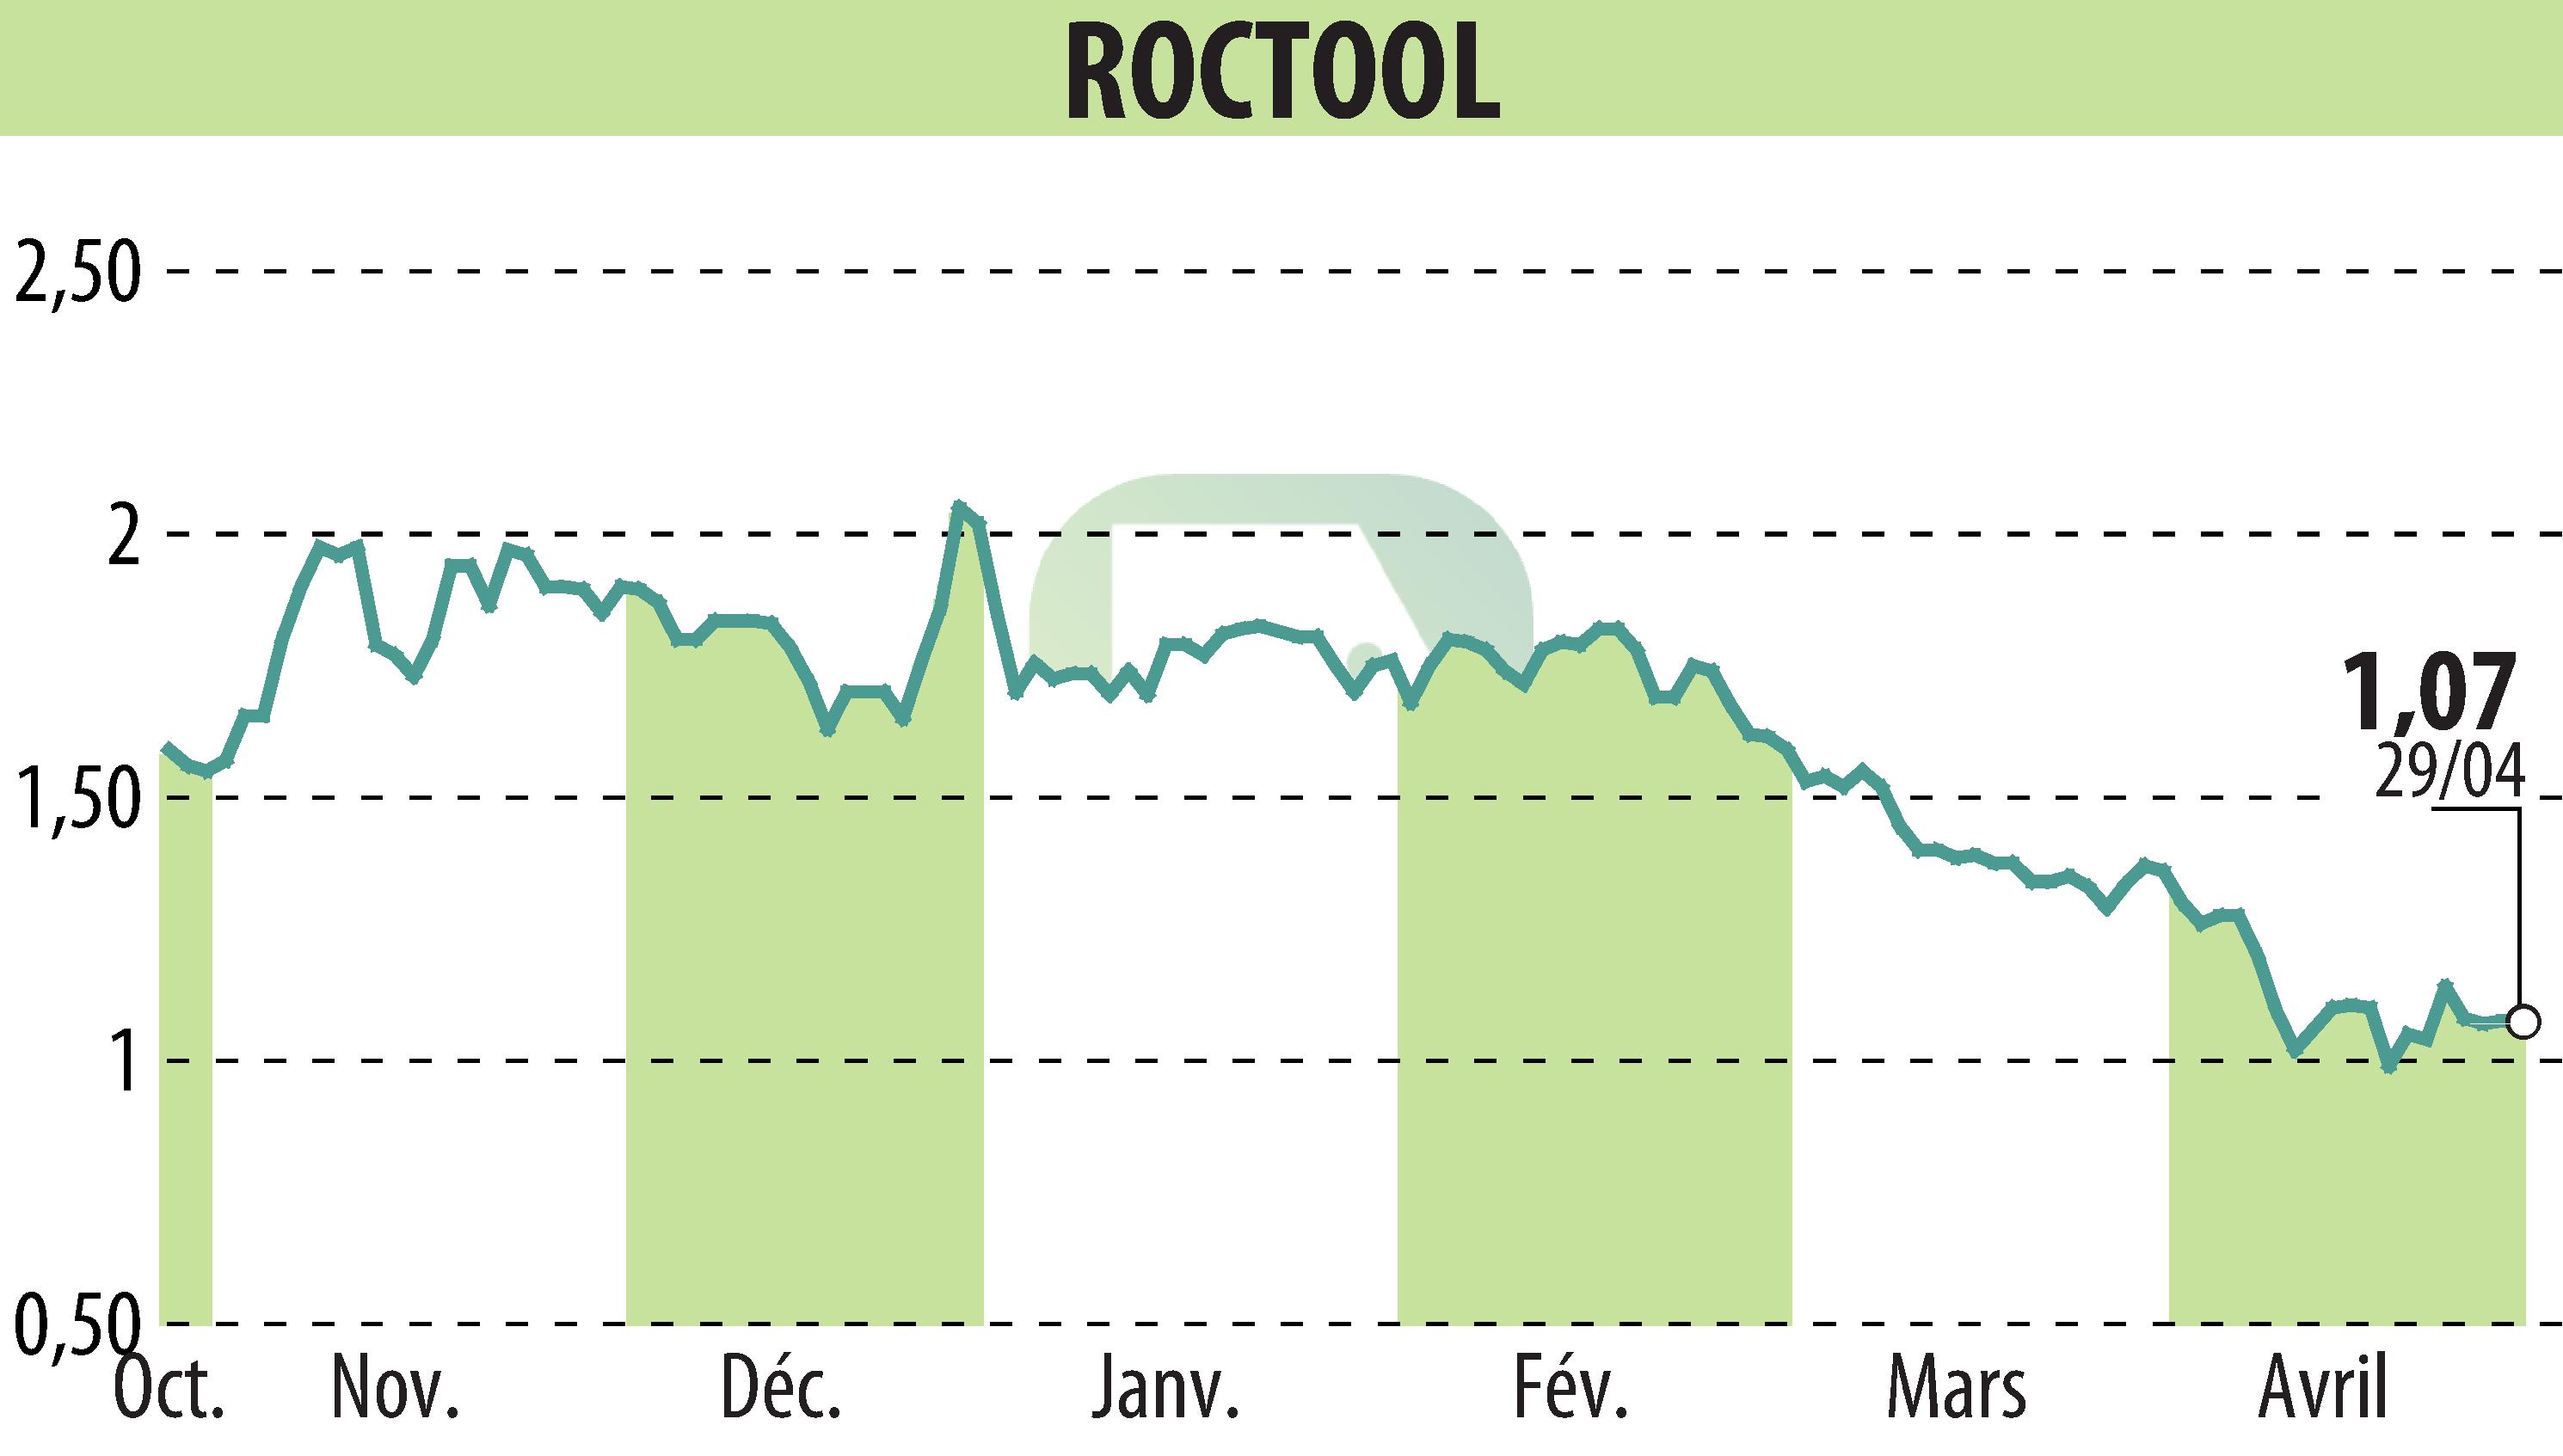 Stock price chart of ROCTOOL (EPA:ALROC) showing fluctuations.